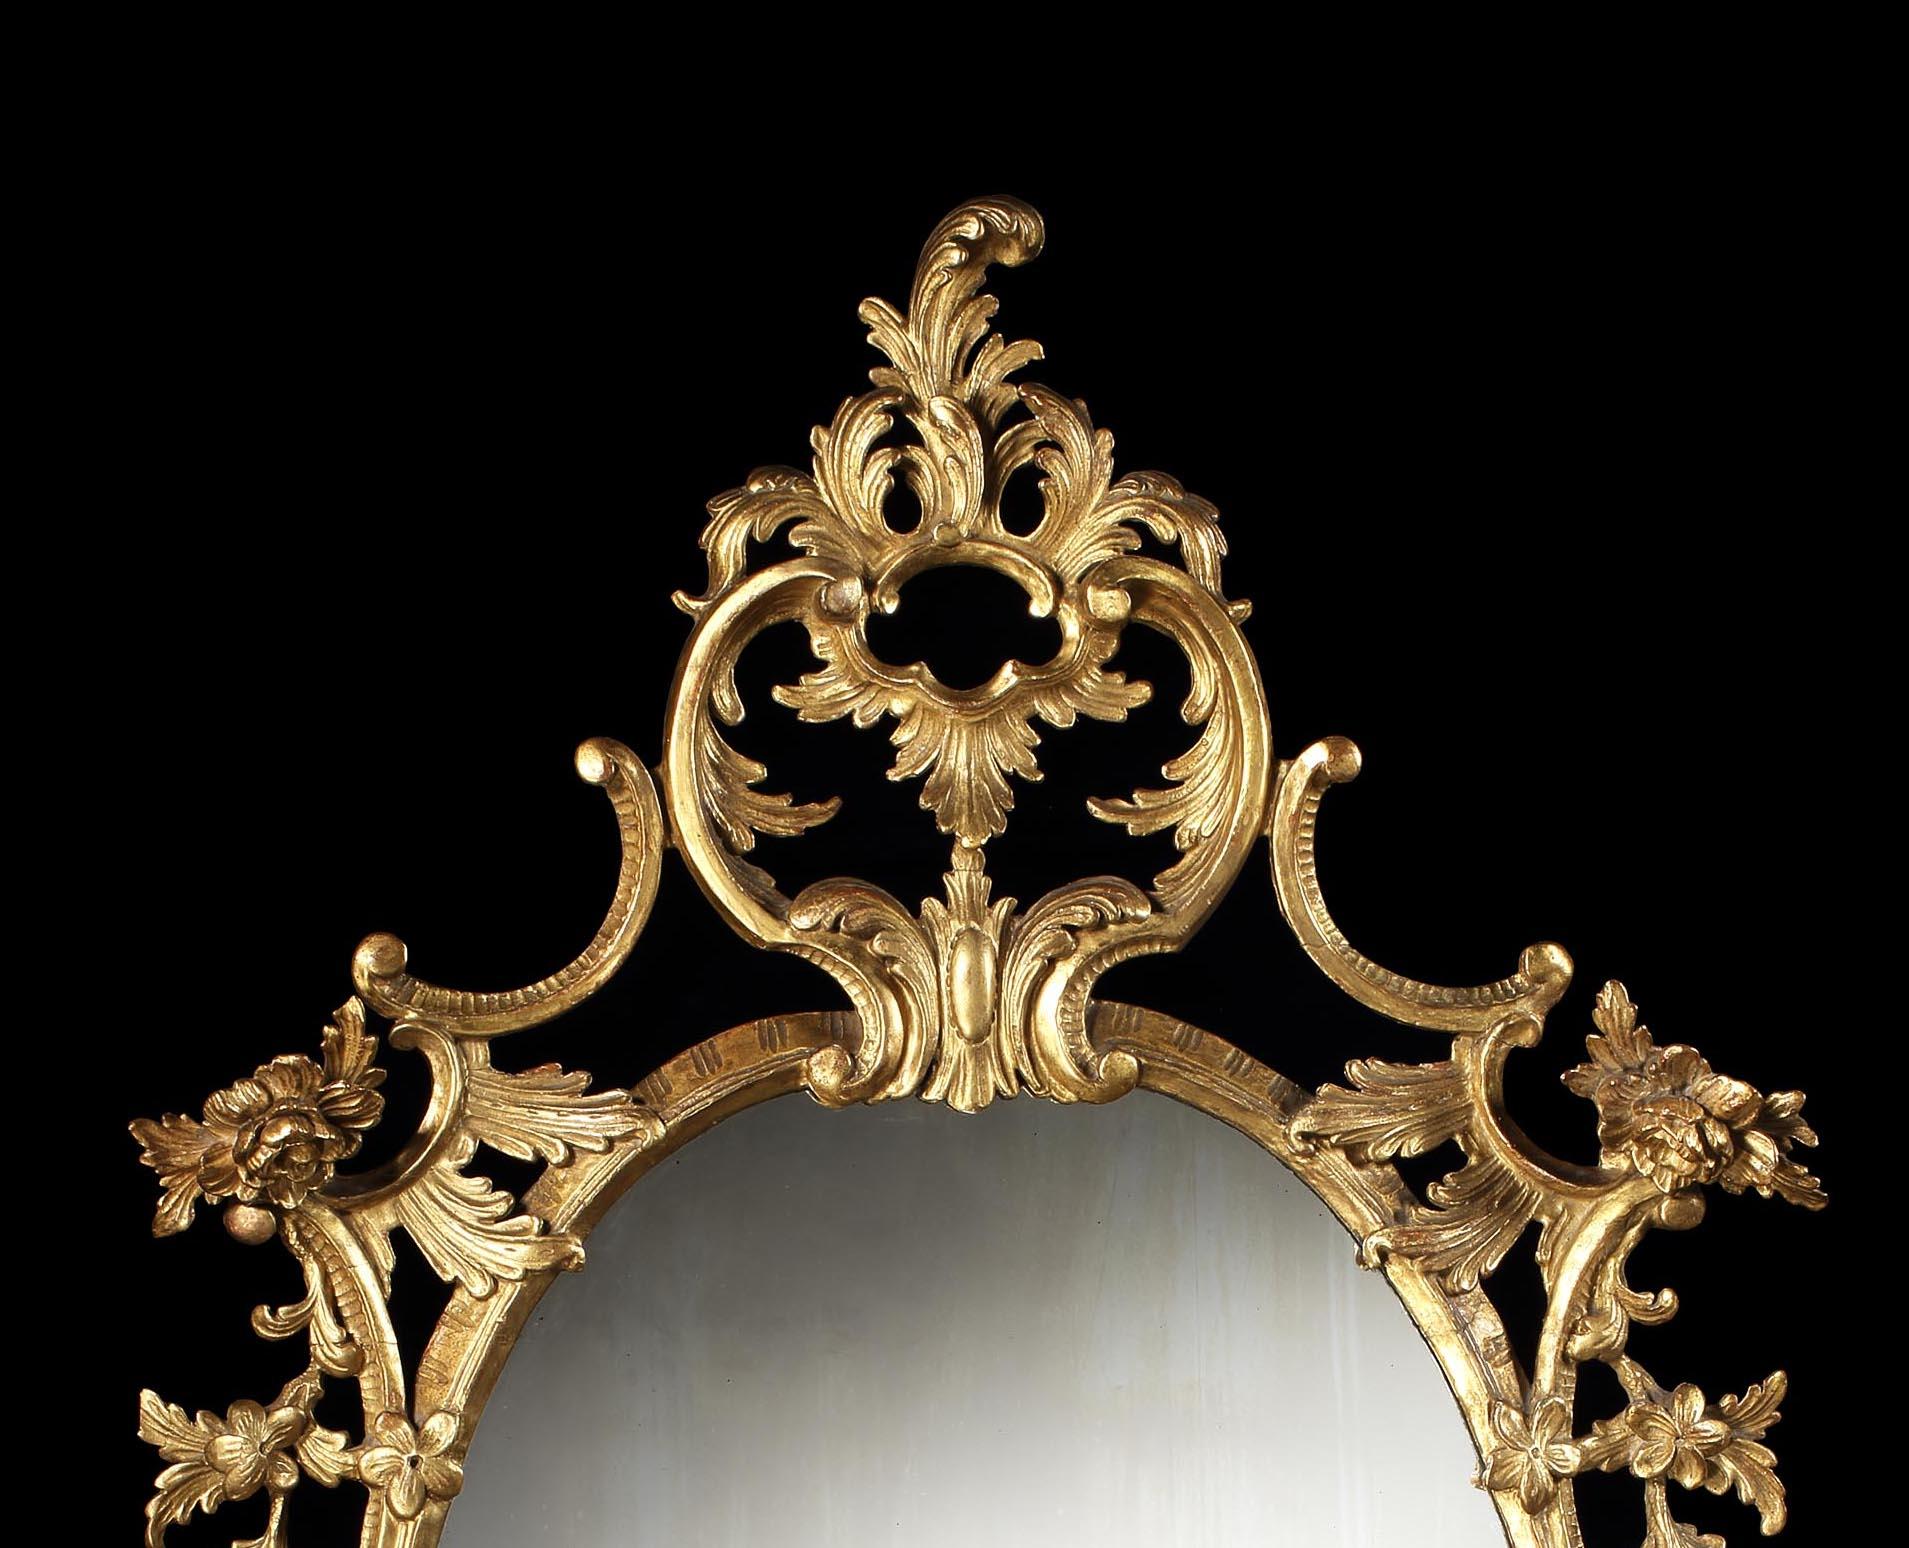 A good pair of looking glasses
In the manner of Thomas Chippendale

The oval mercury glass plates housed within ornate rococo carved and pierced gilt wood frames, composed of 'C' scrolls, flowering branchwork, and stylised acanthus